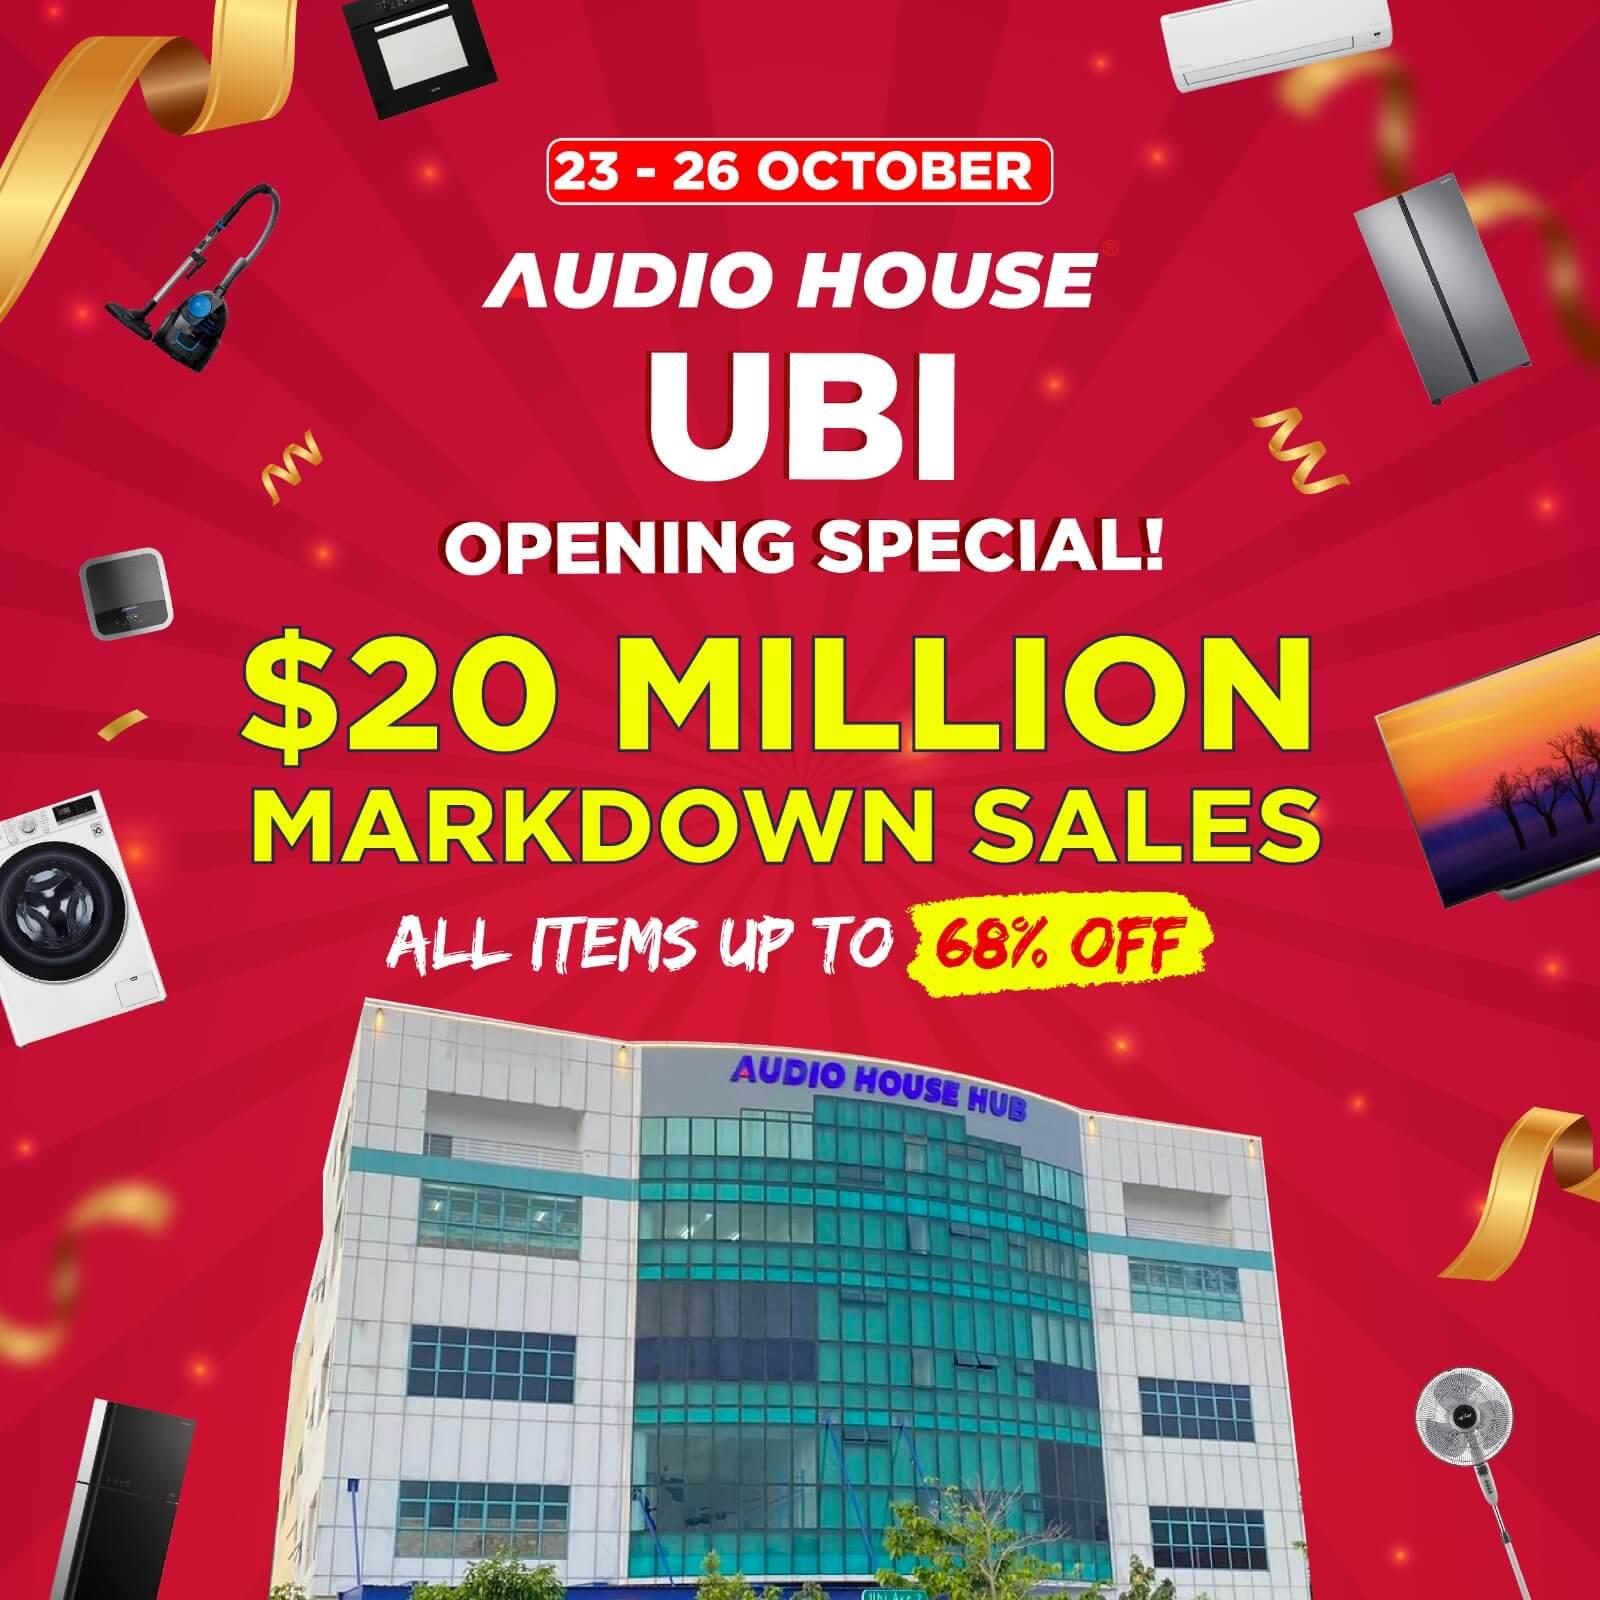 23 Oct - 26 Oct: Audio House Opening Special All Items Up To 68% Off!